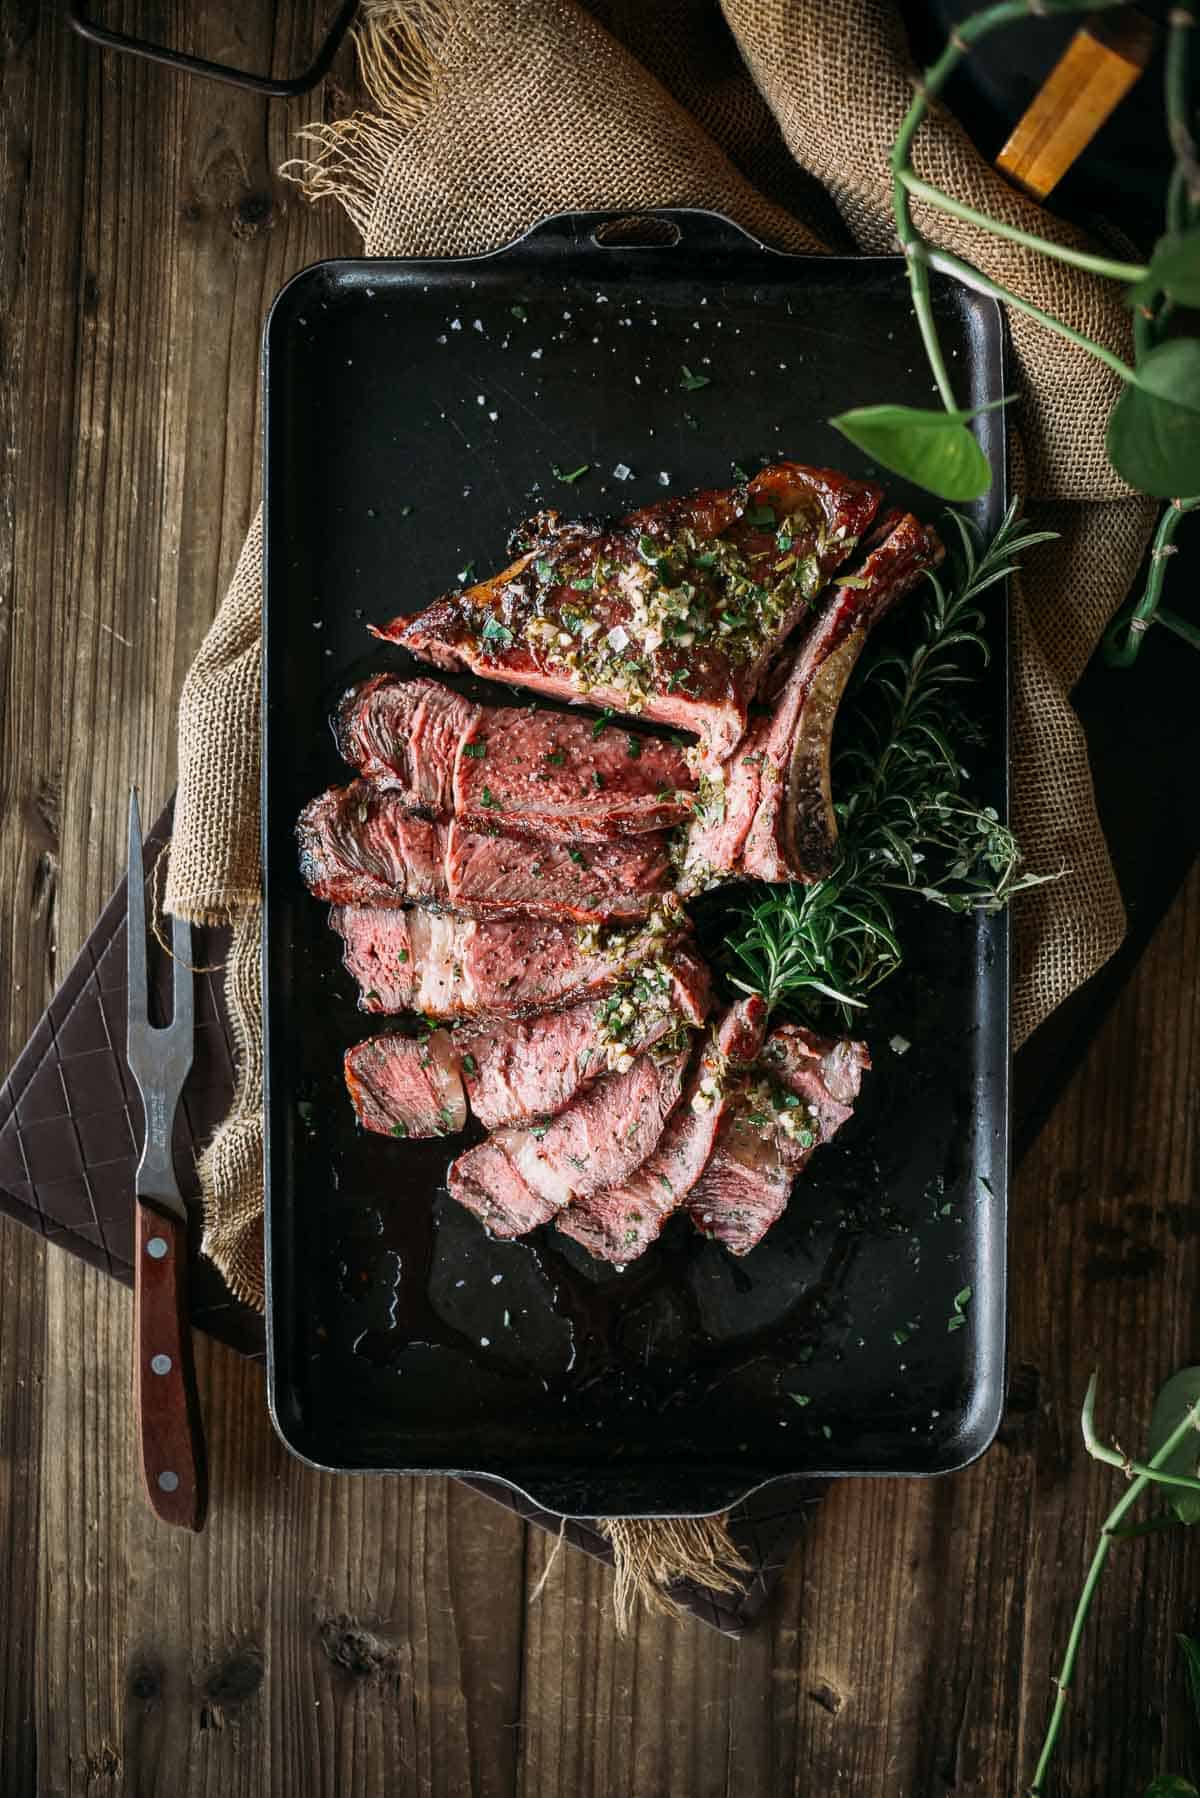 A cooked ribeye steak sliced and garnished with herbs on a black tray.